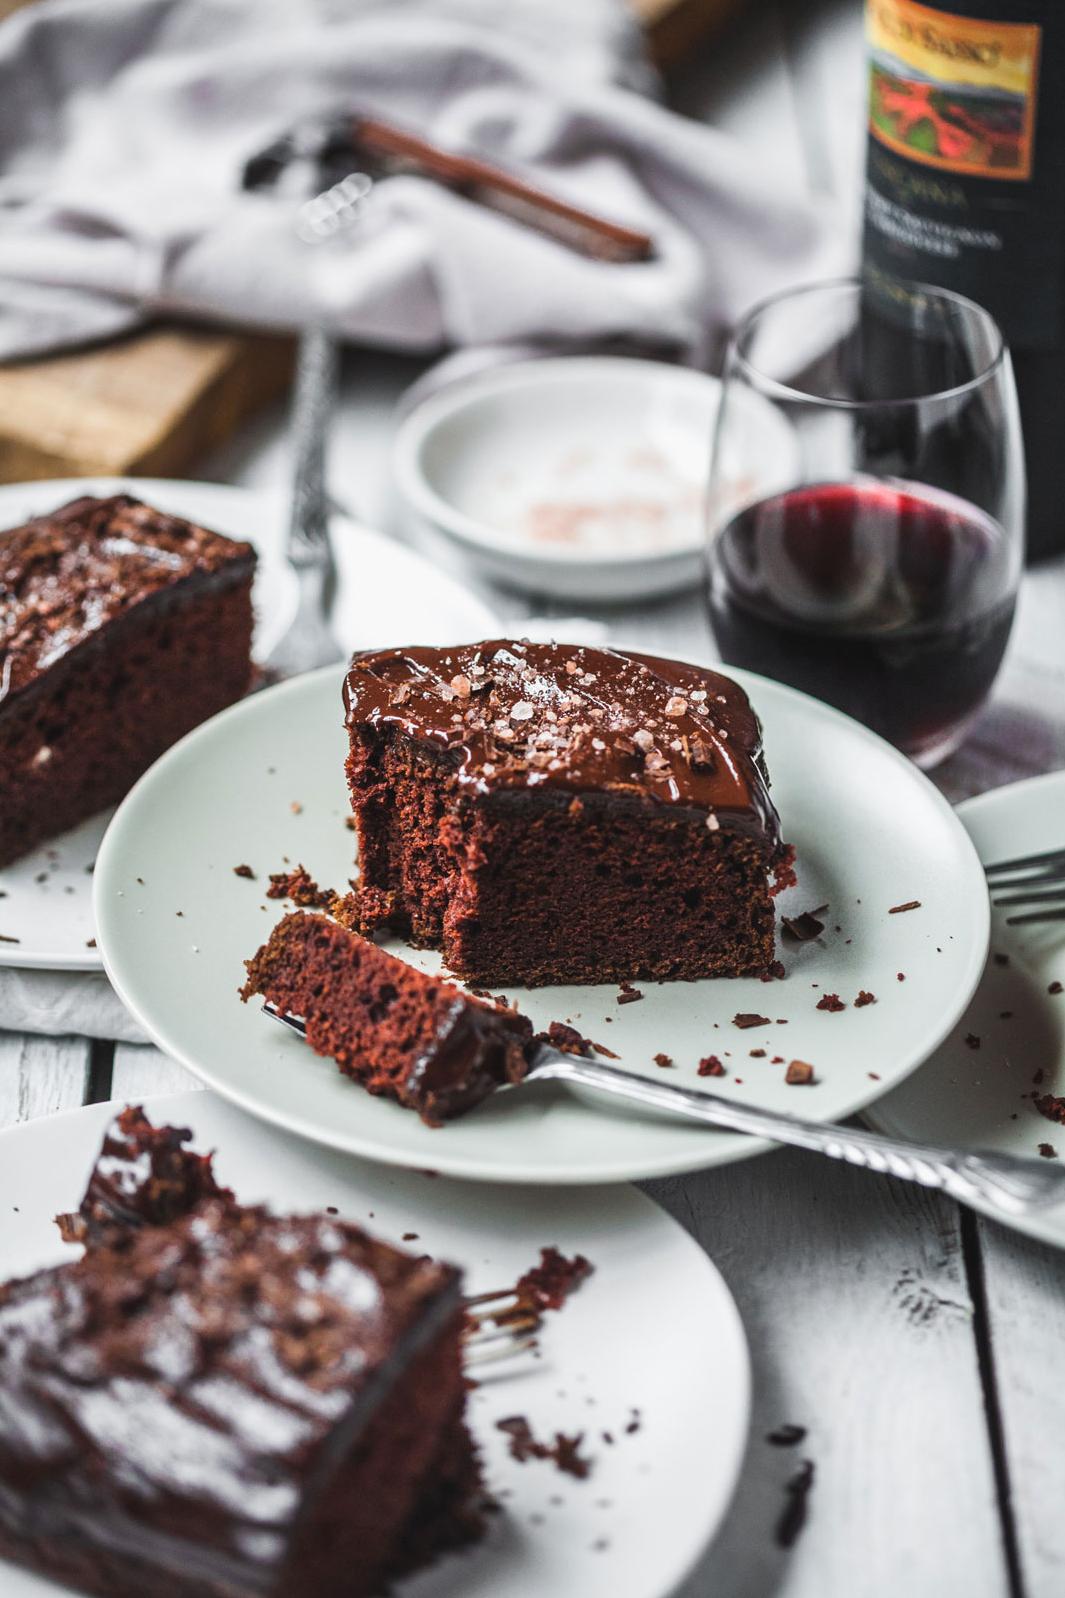  You can't go wrong with a cake that has wine as an ingredient